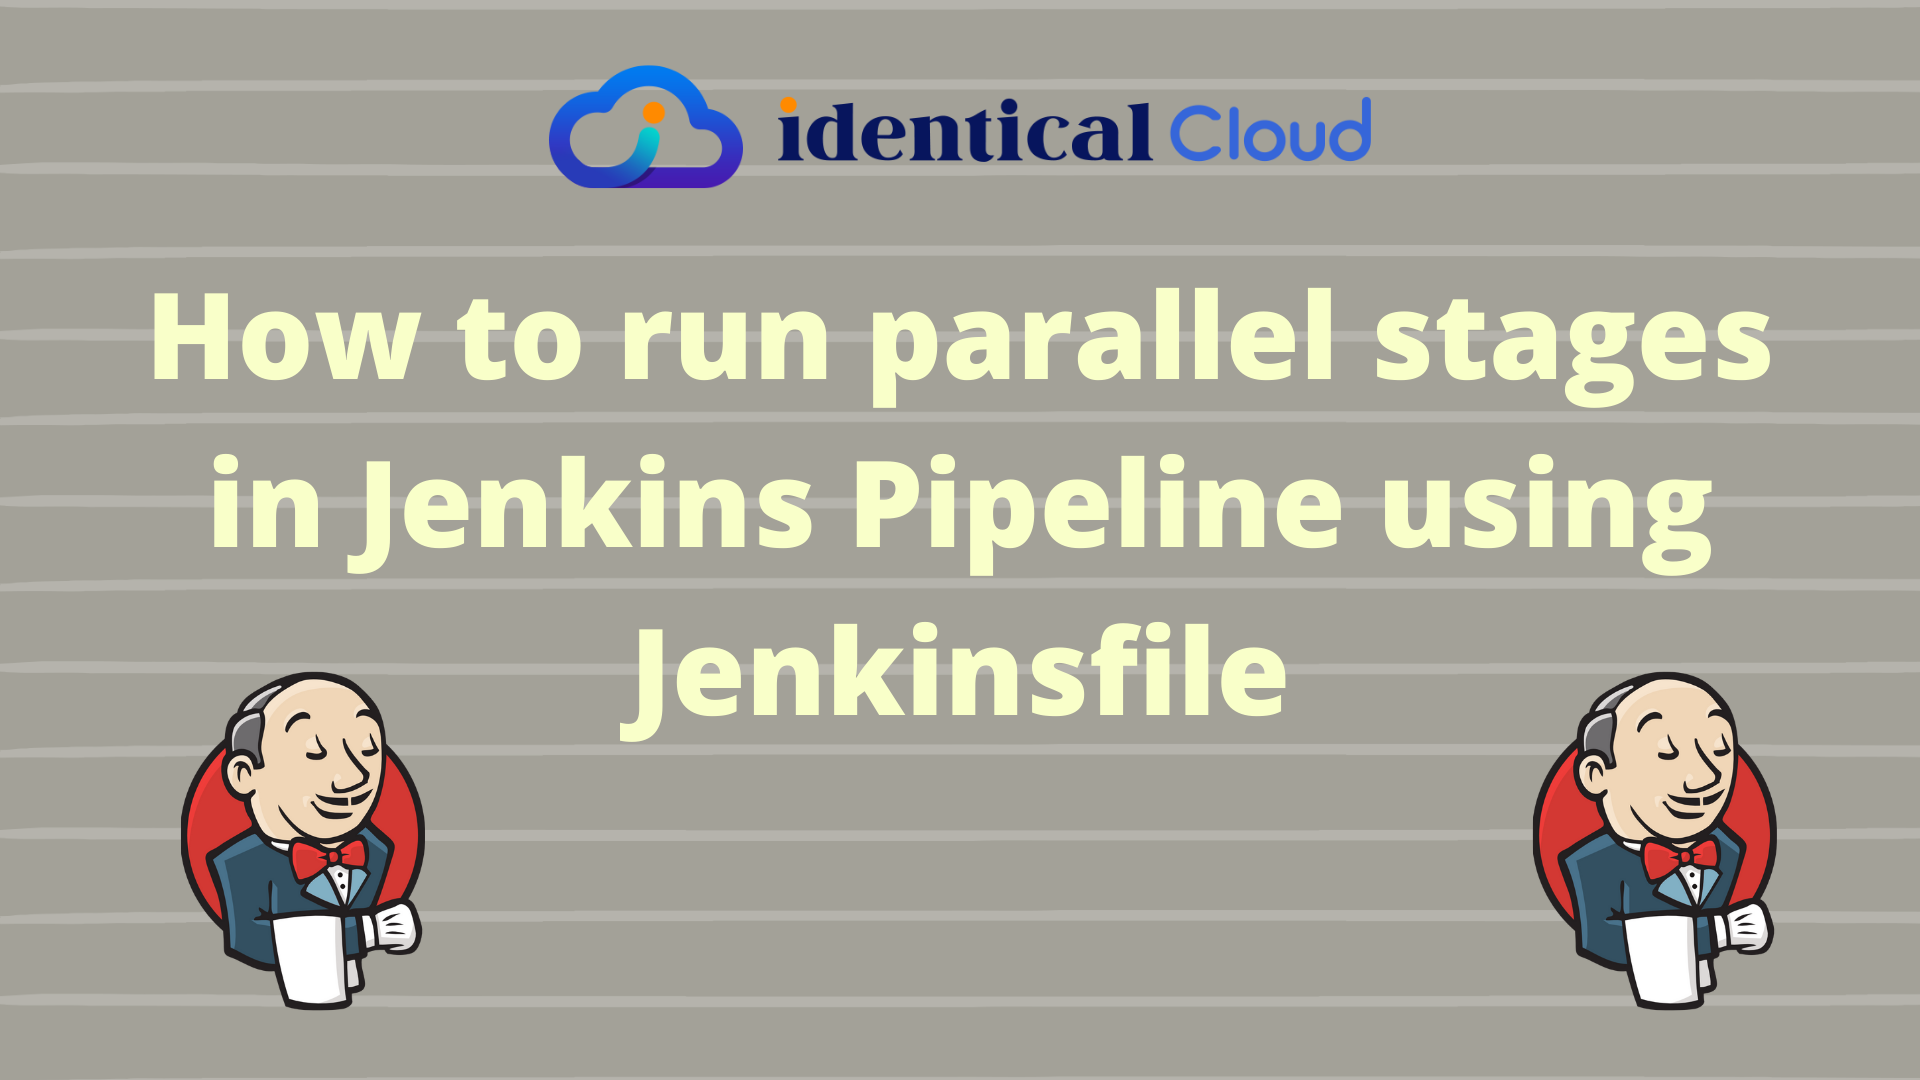 How to run parallel stages in Jenkins Pipeline using Jenkinsfile